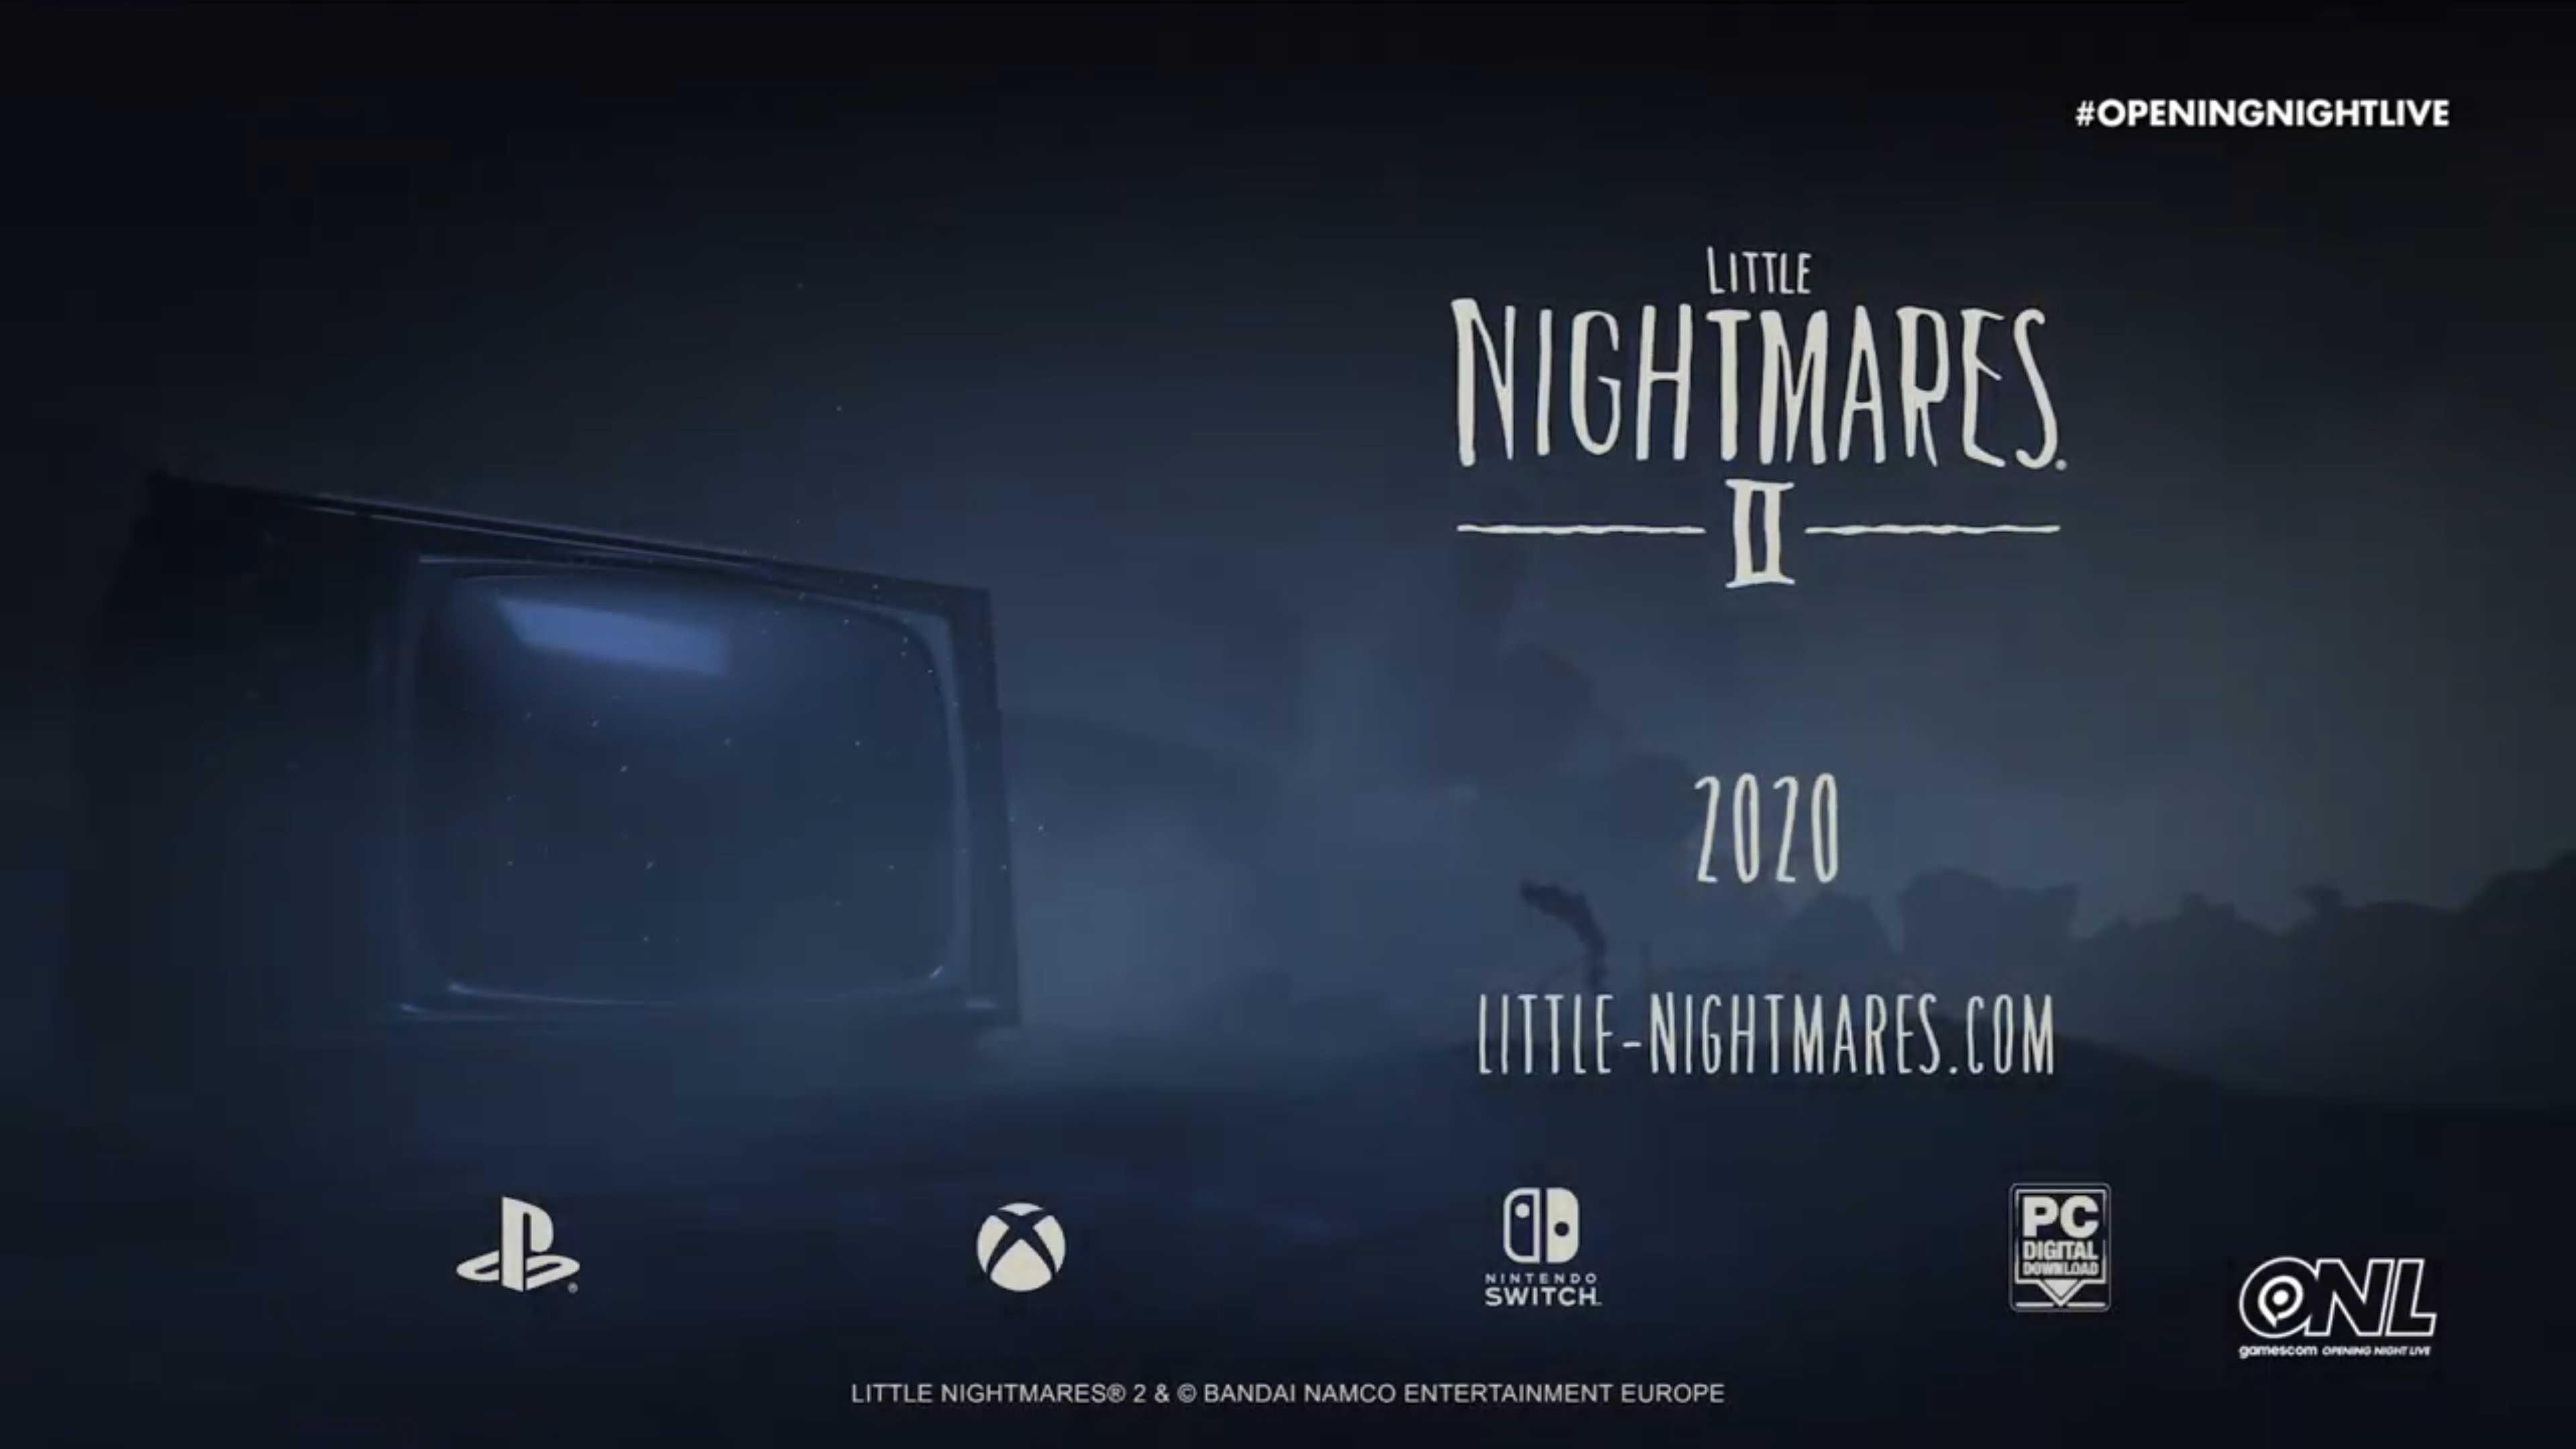 Little Nightmares II announced, coming to Switch